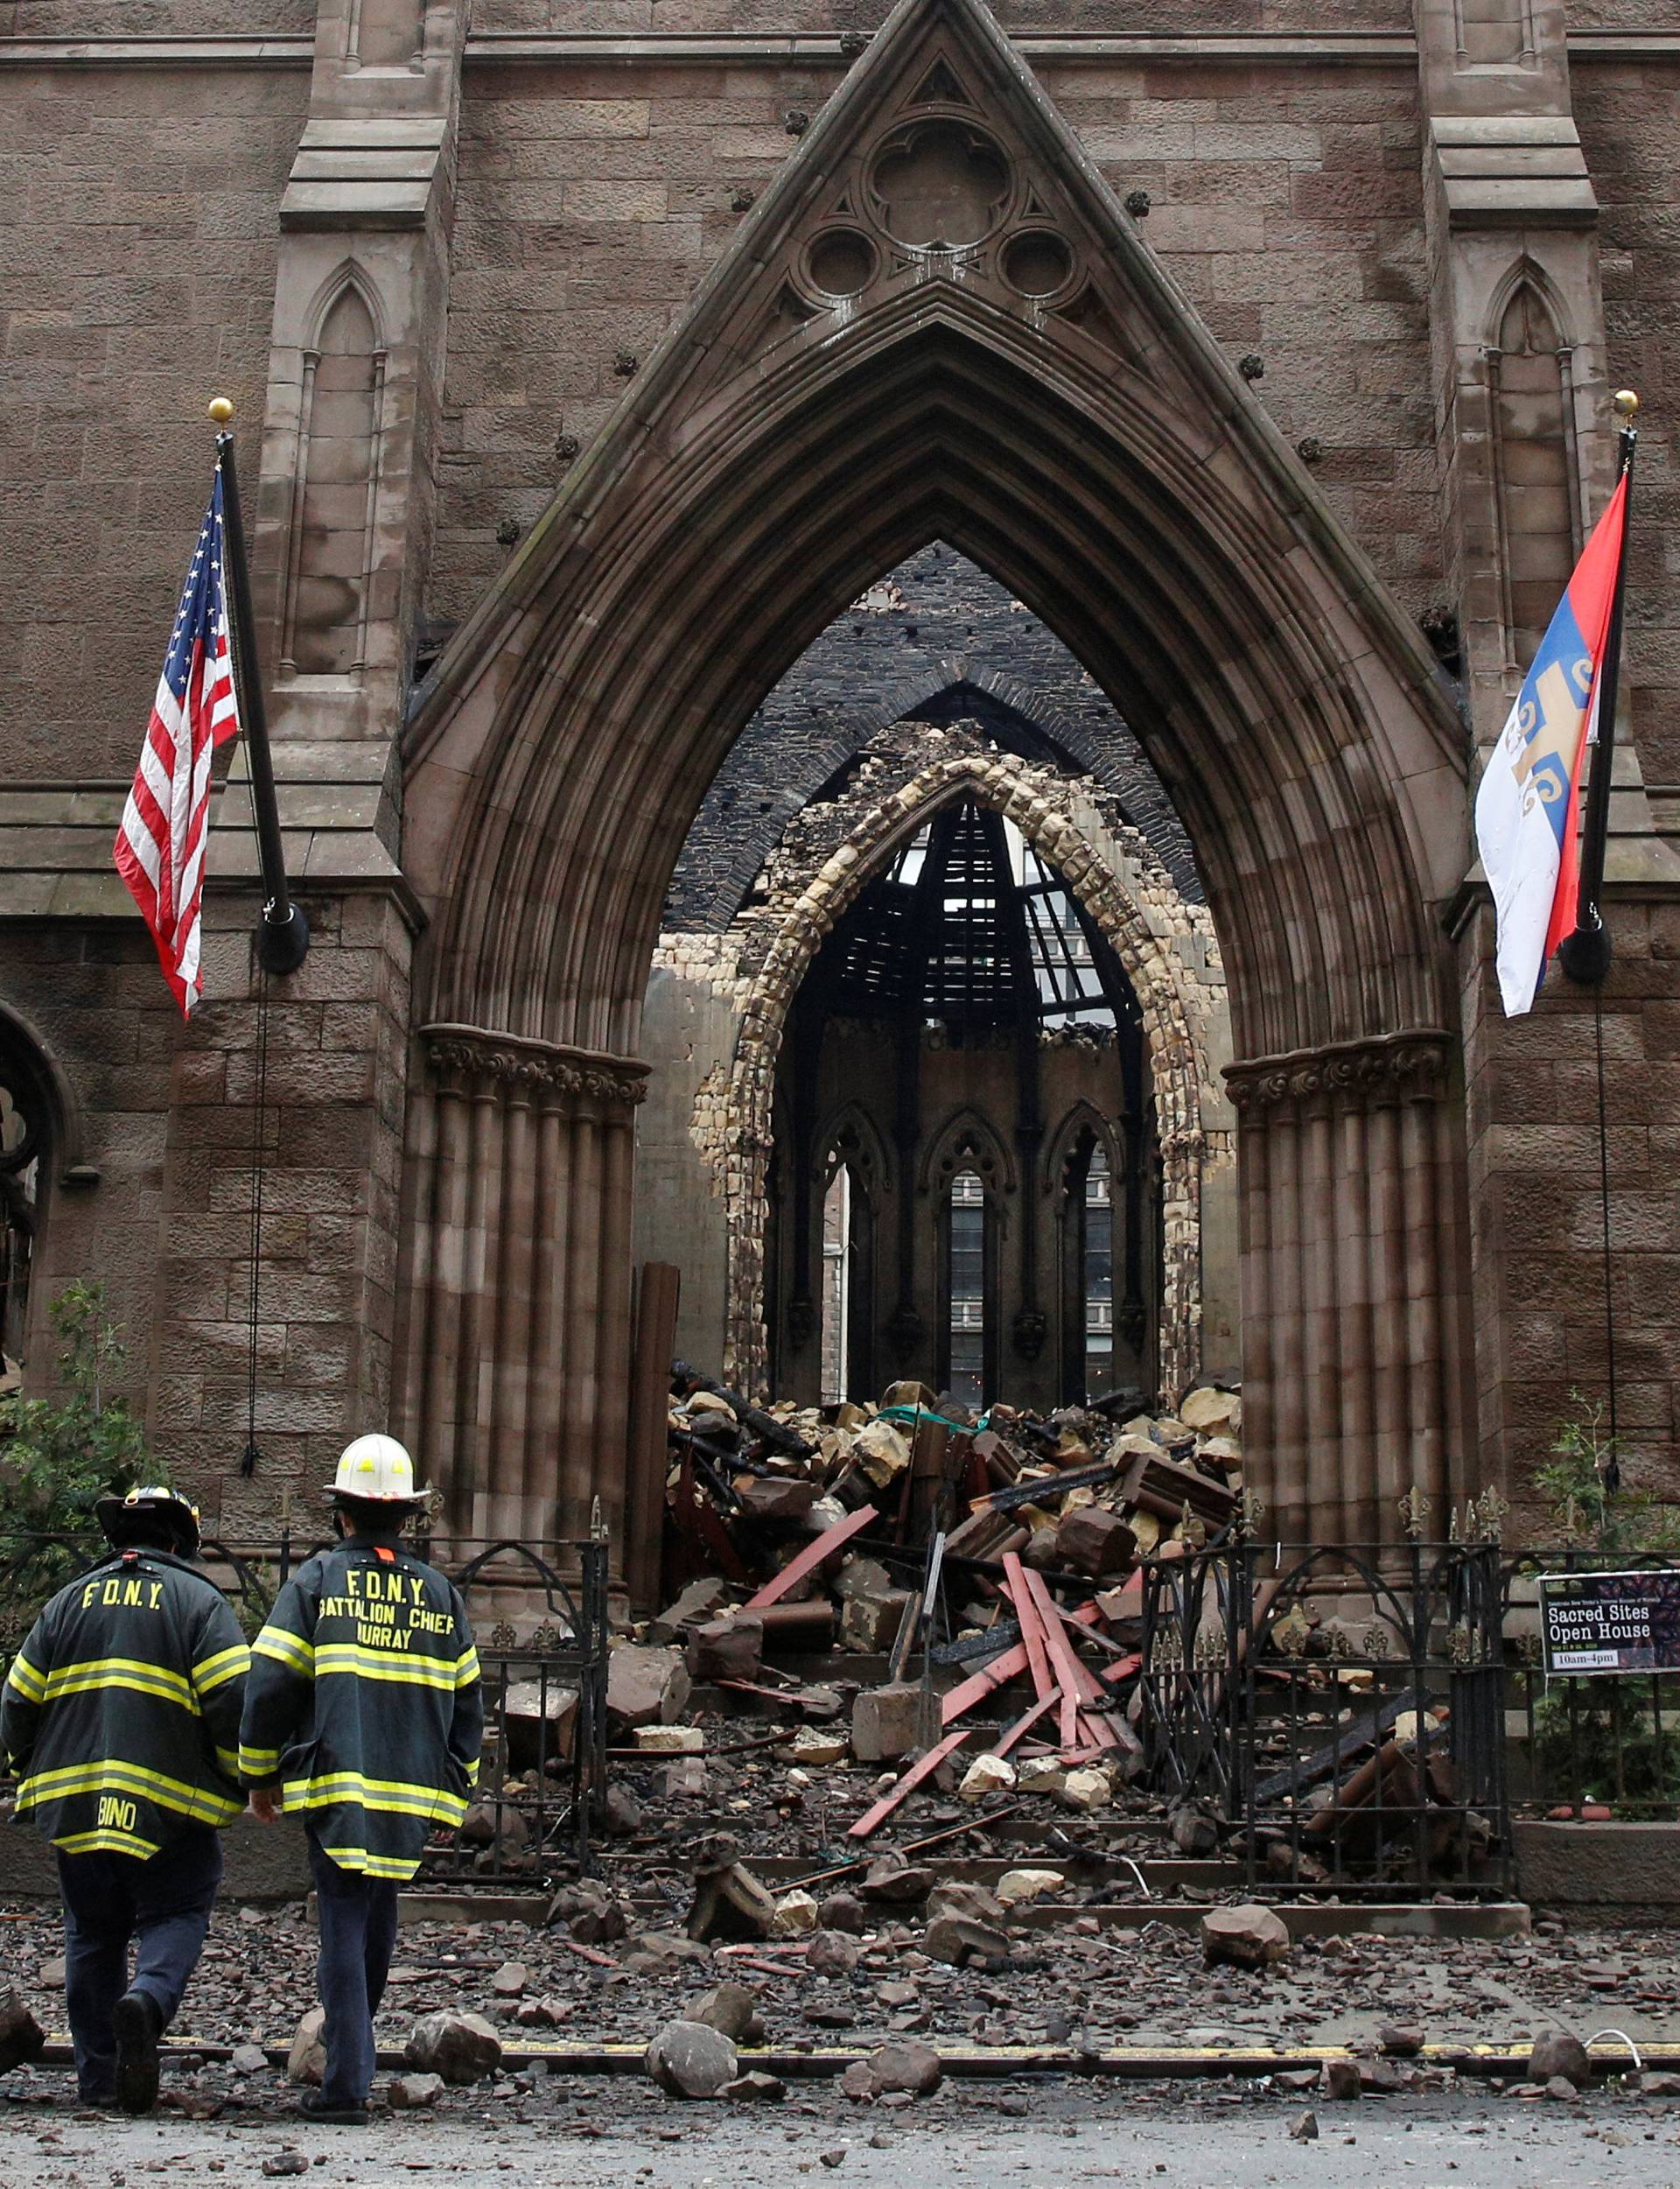 New York City firefighters (FDNY) walk through the debris following a fire at Manhattan's historic Serbian Orthodox Cathedral of Saint Sava in New York 